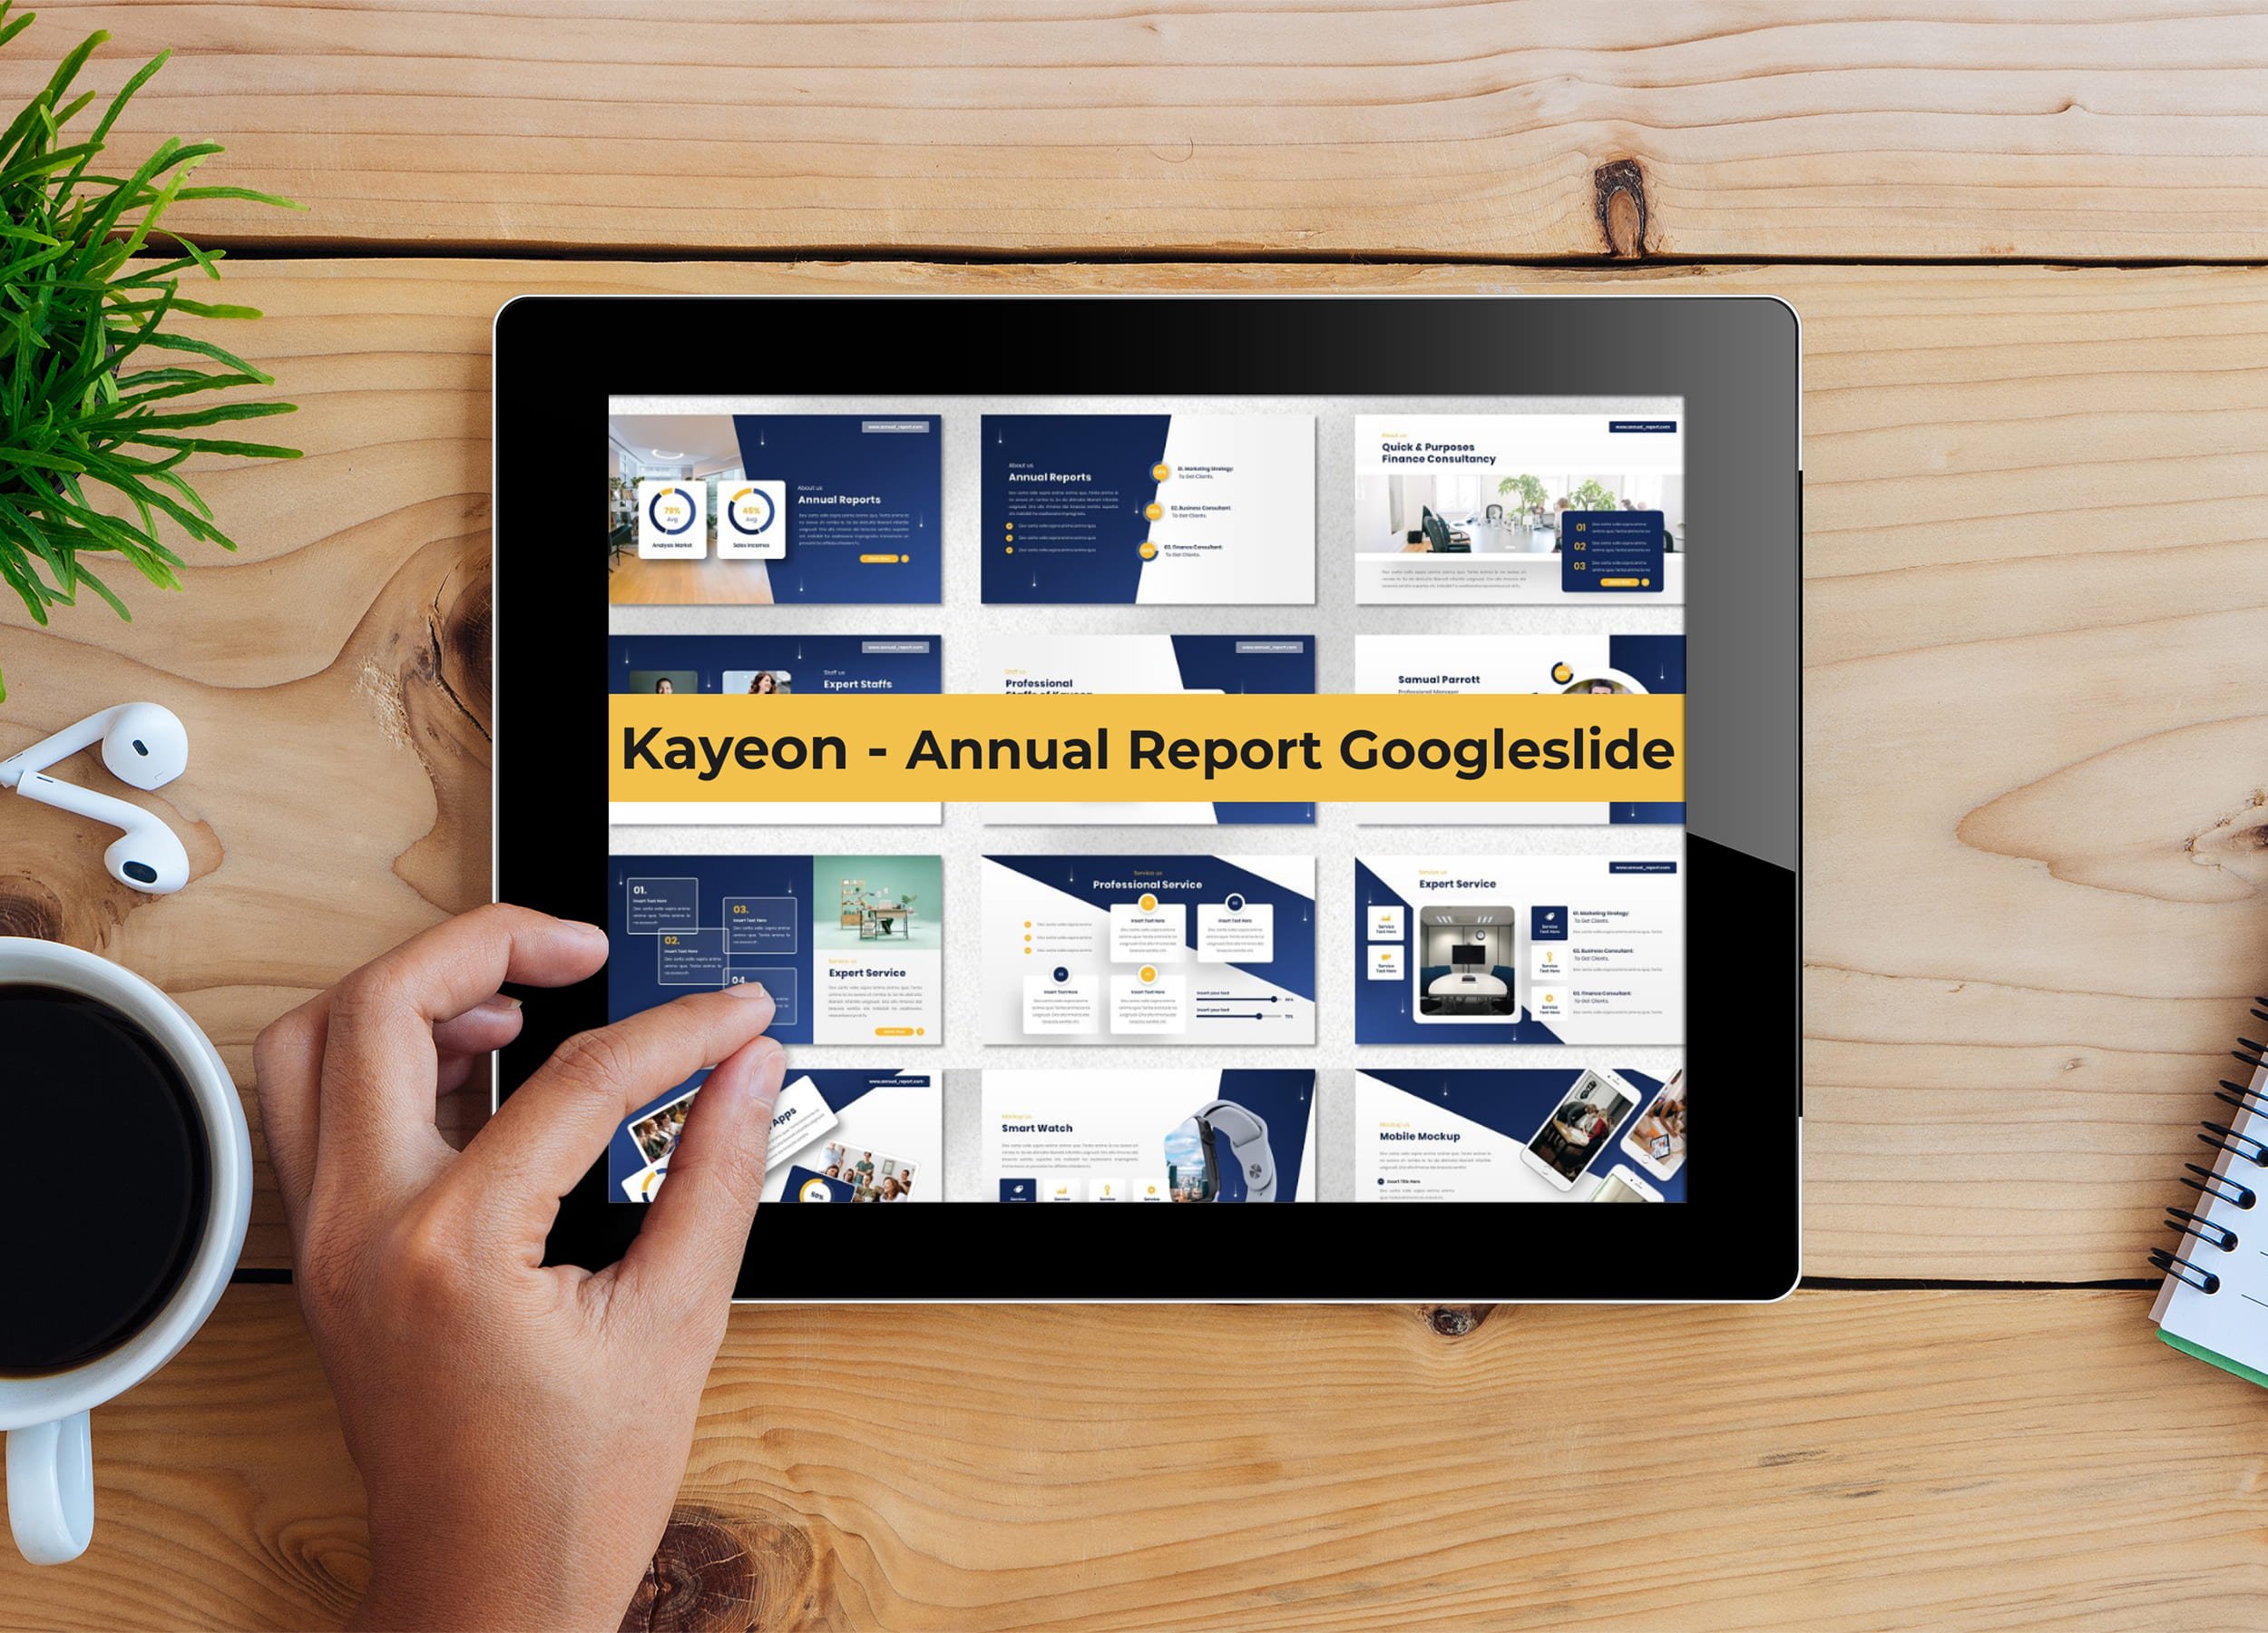 Tablet option of the Kayeon - Annual Report Googleslide.